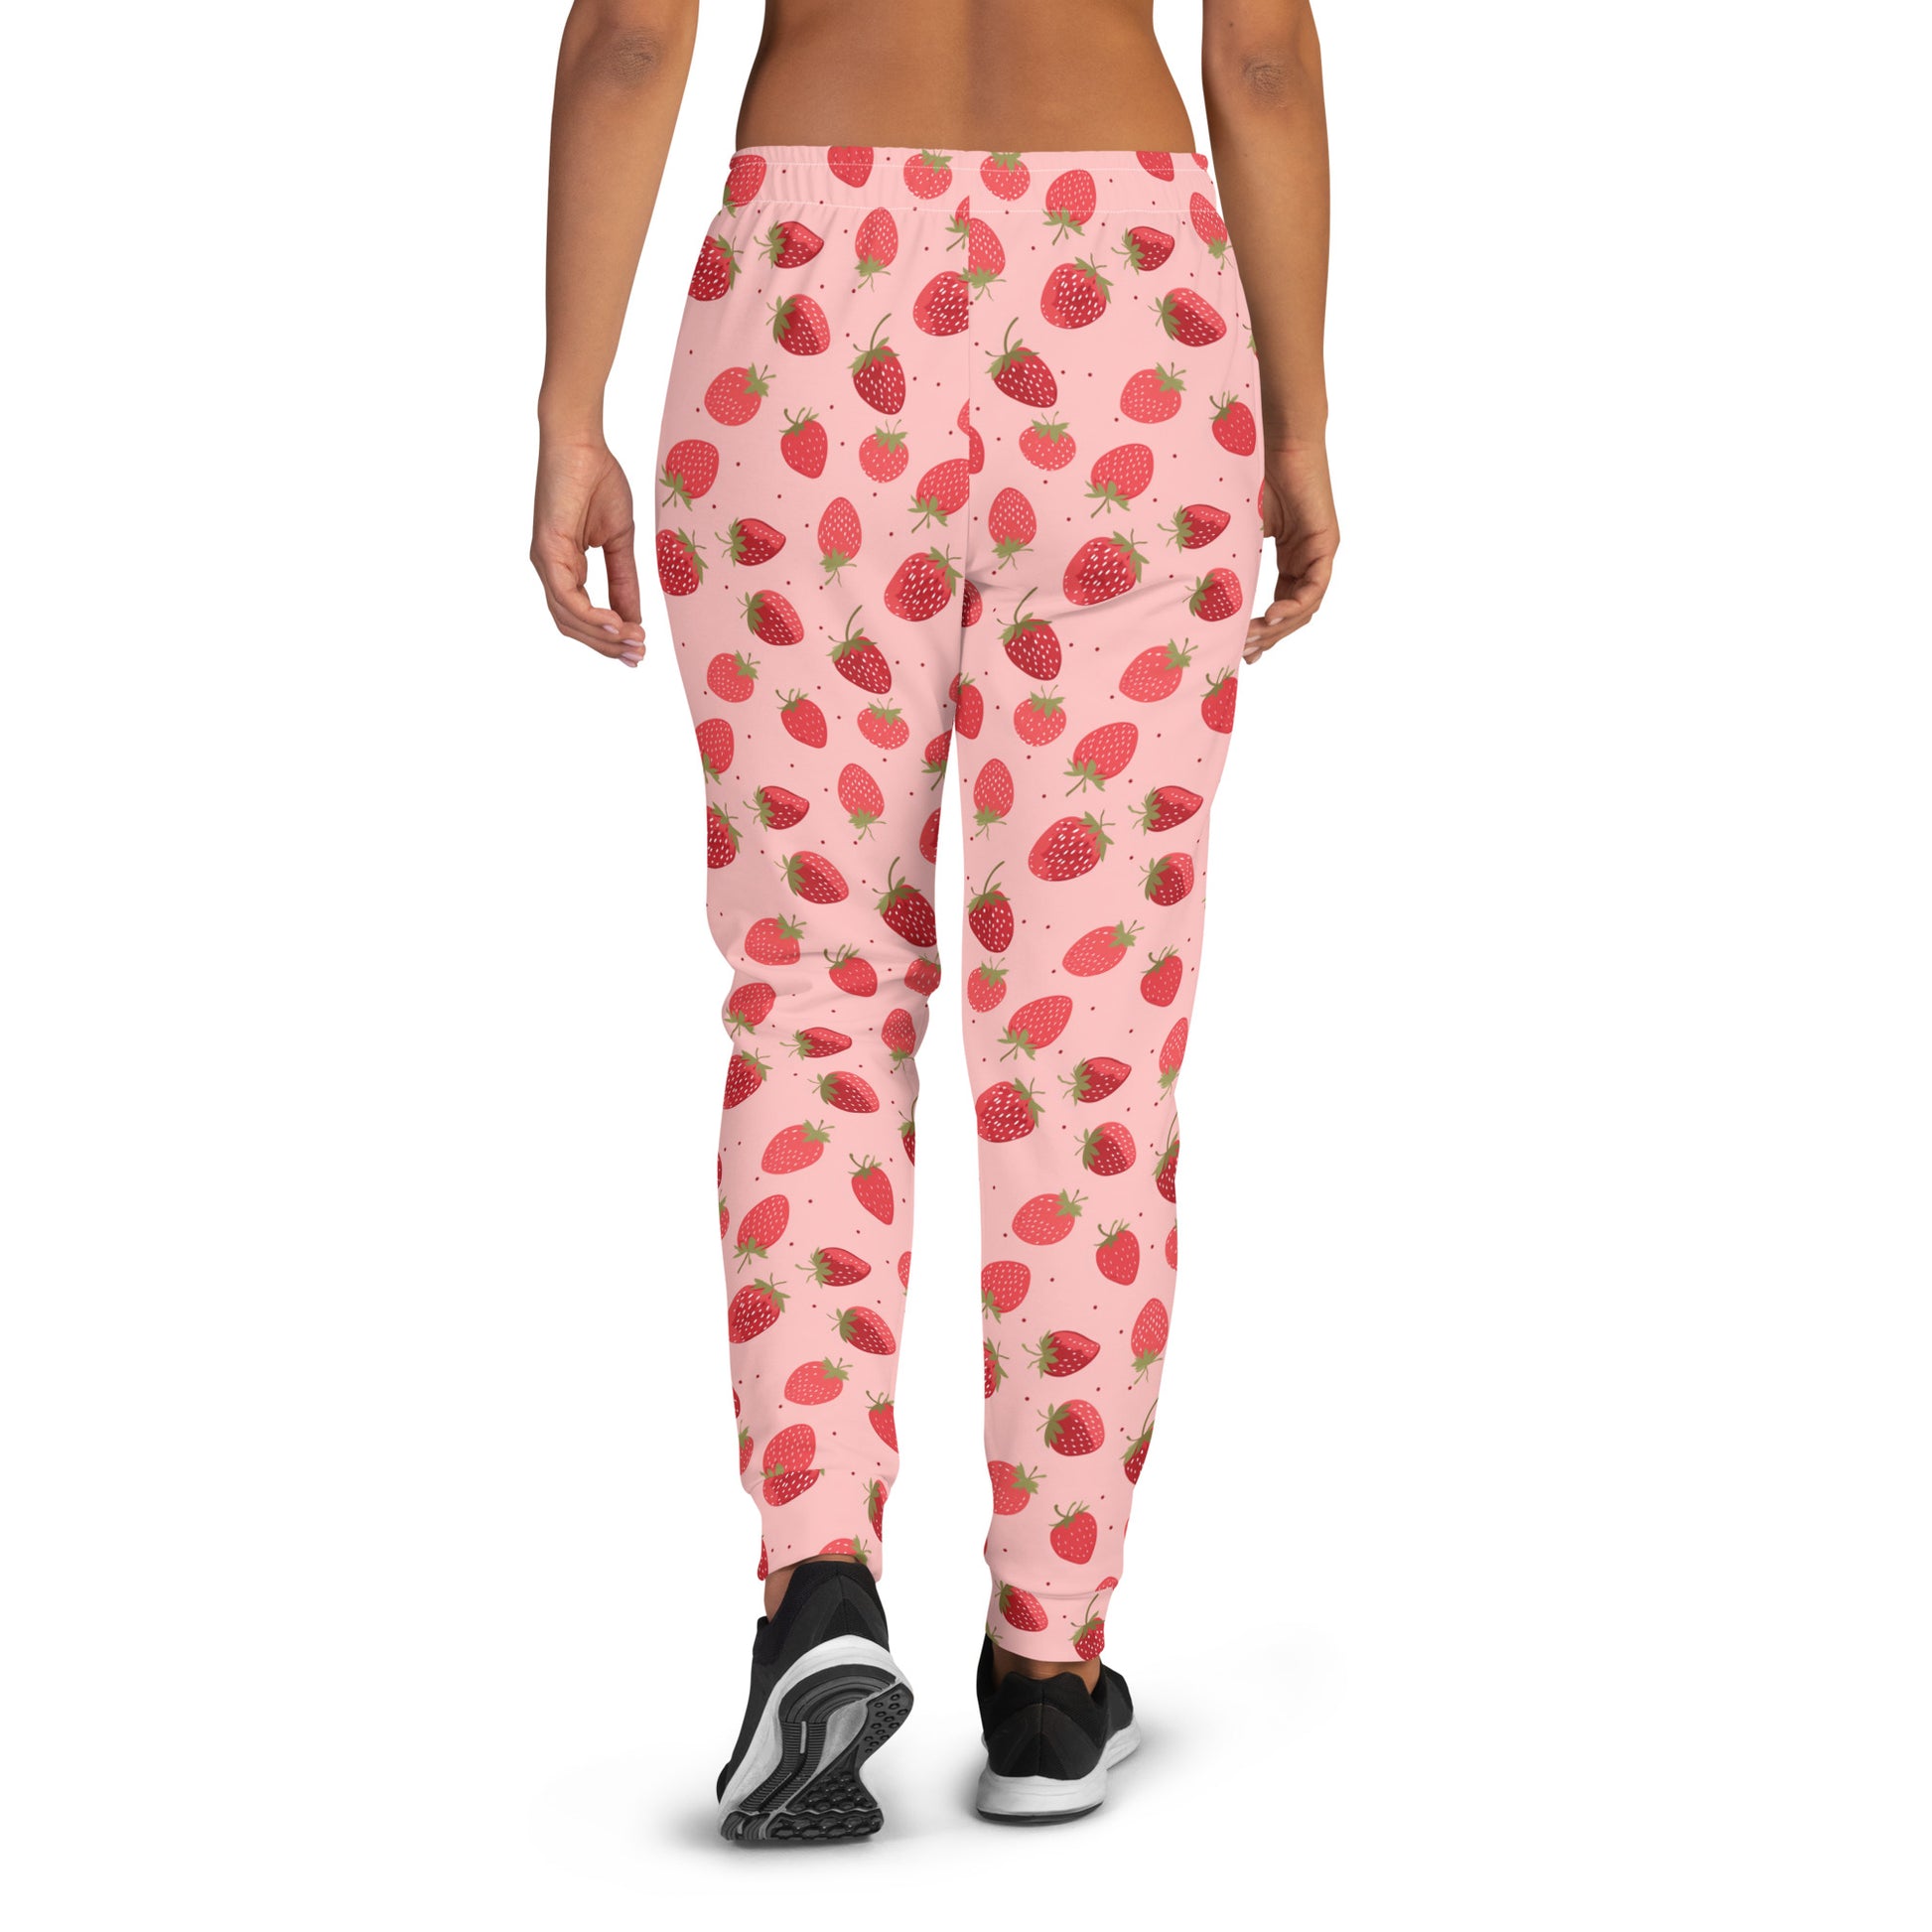 Strawberry Women Joggers Sweatpants with Pockets, Red Pink Fruit